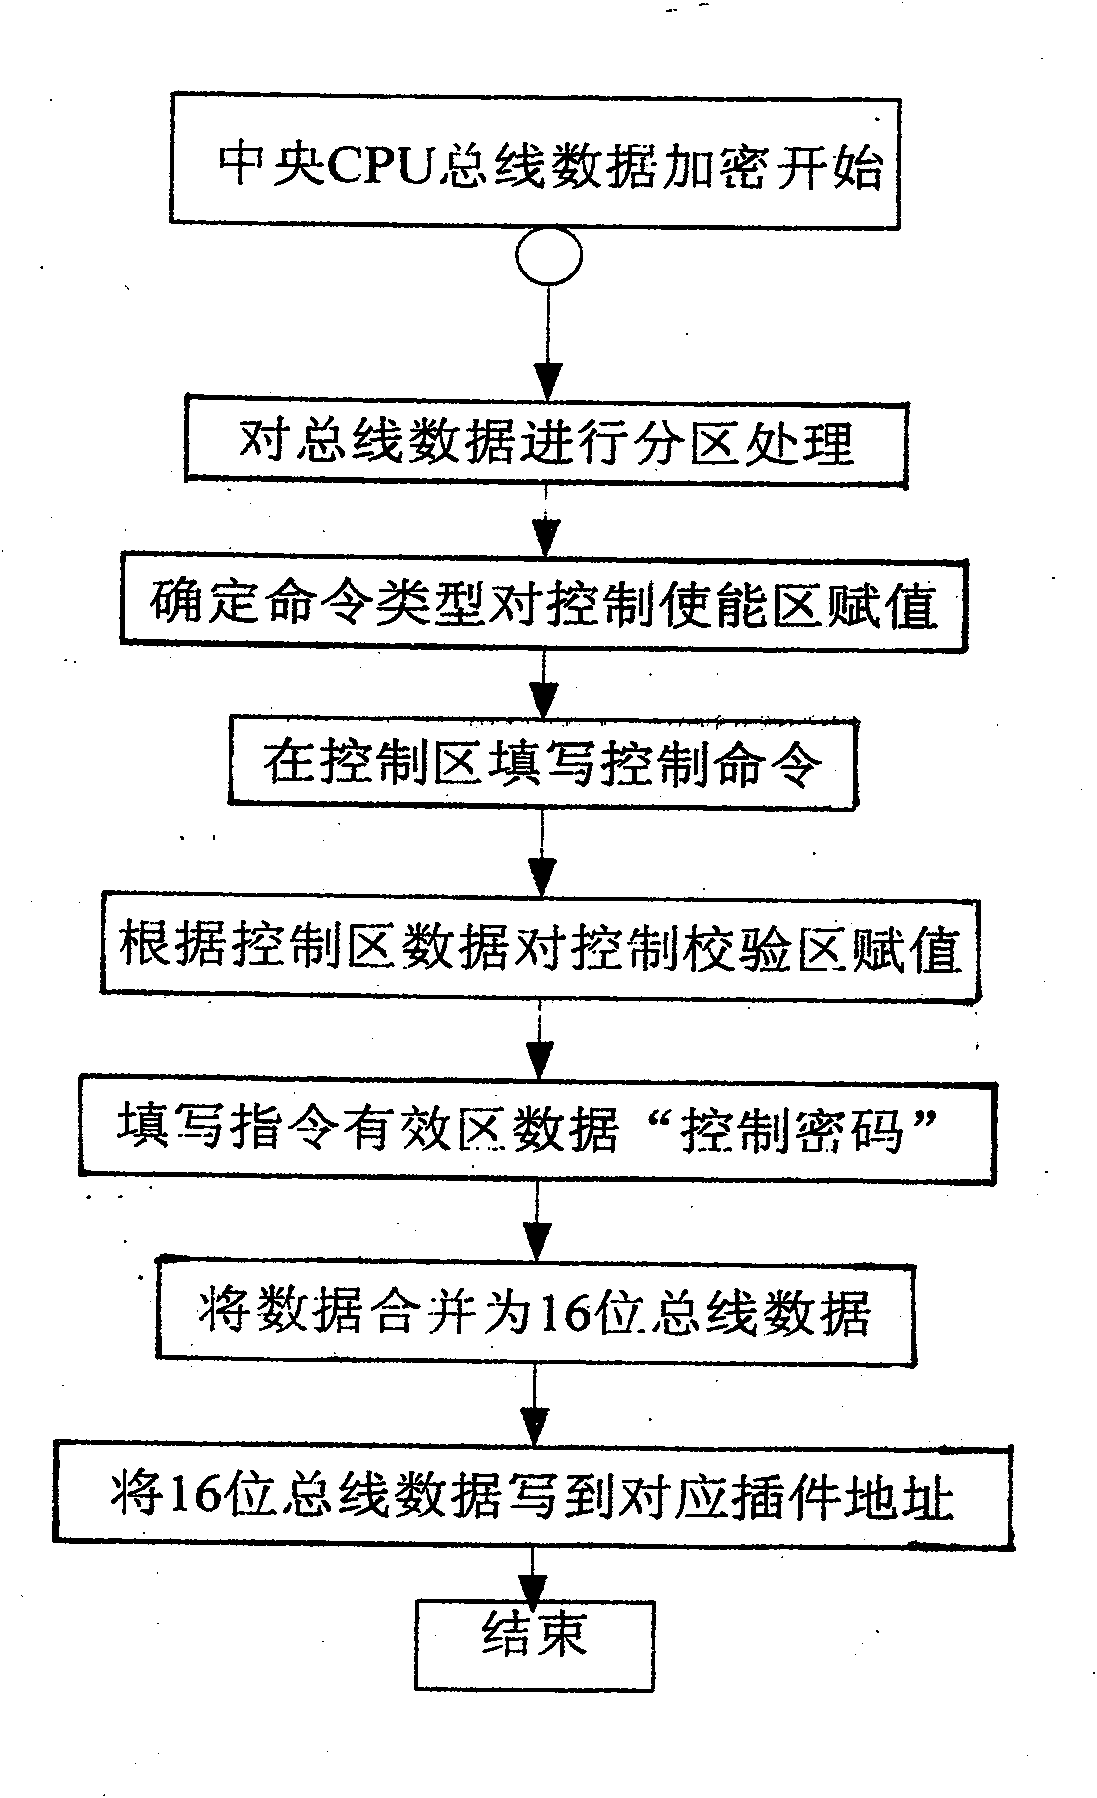 Method for anti-interference encryption in bus expansion